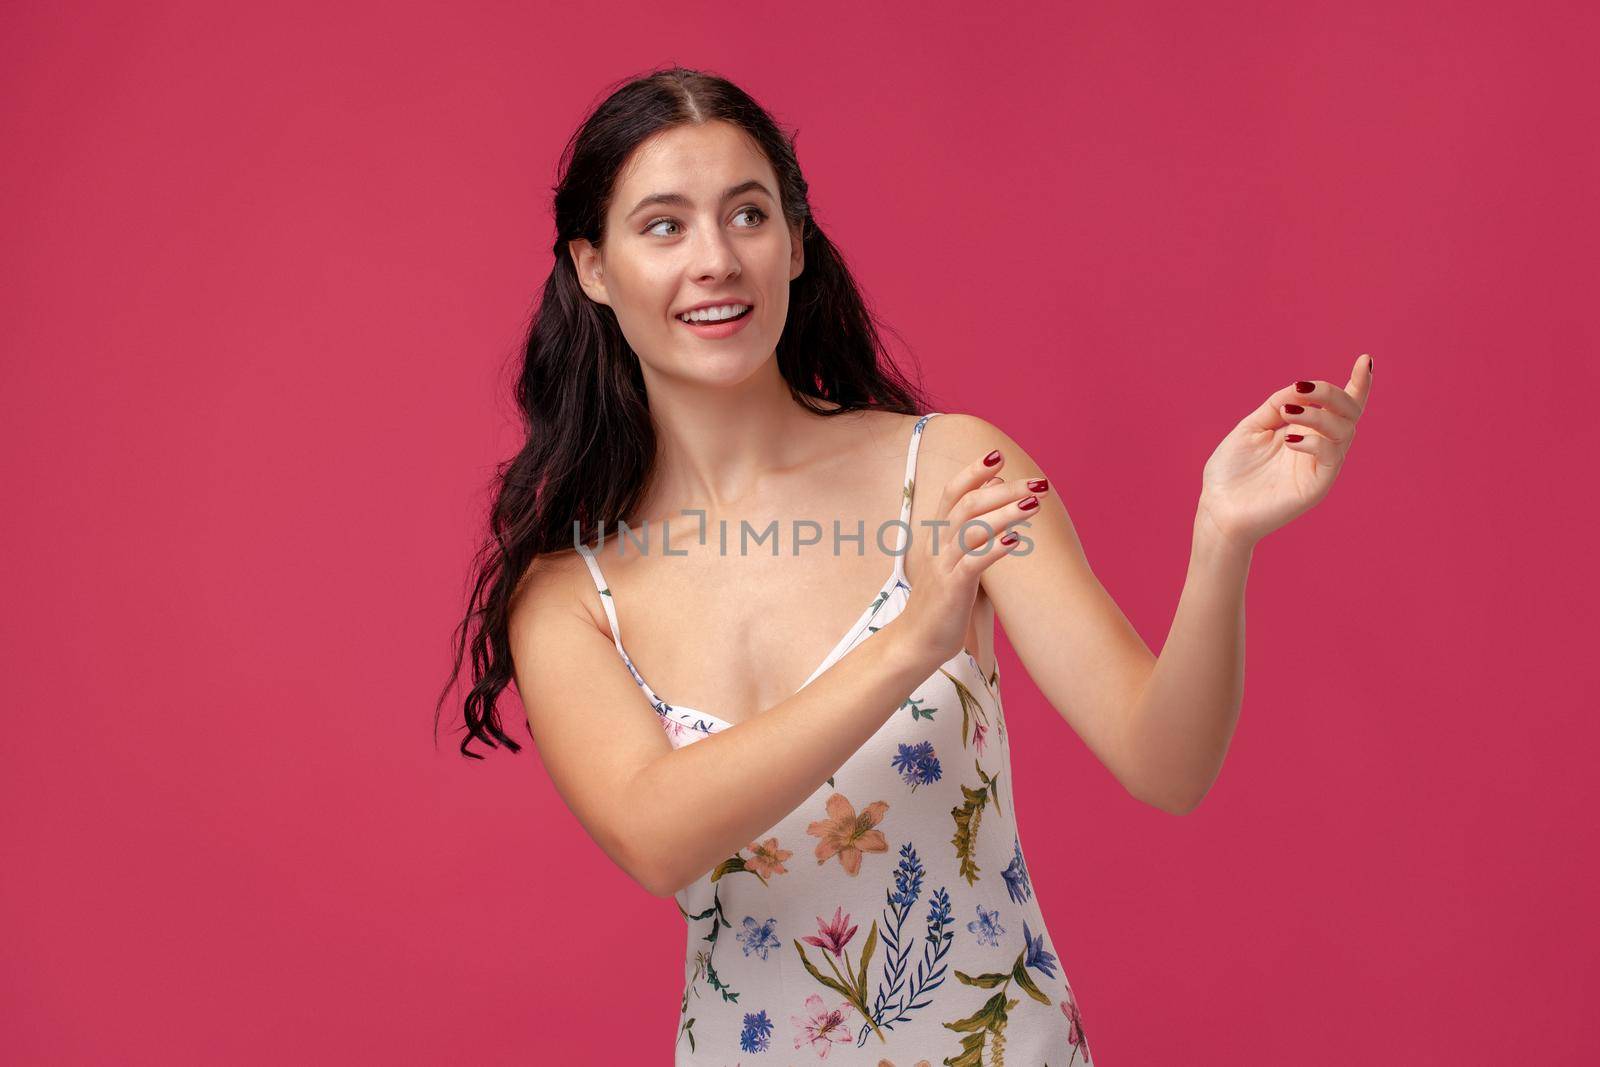 Portrait of a beautiful lady in a white dress with floral print standing on a pink wall background in studio. She is pointing at something, smiling and looking happy. People sincere emotions, lifestyle concept. Mockup copy space.